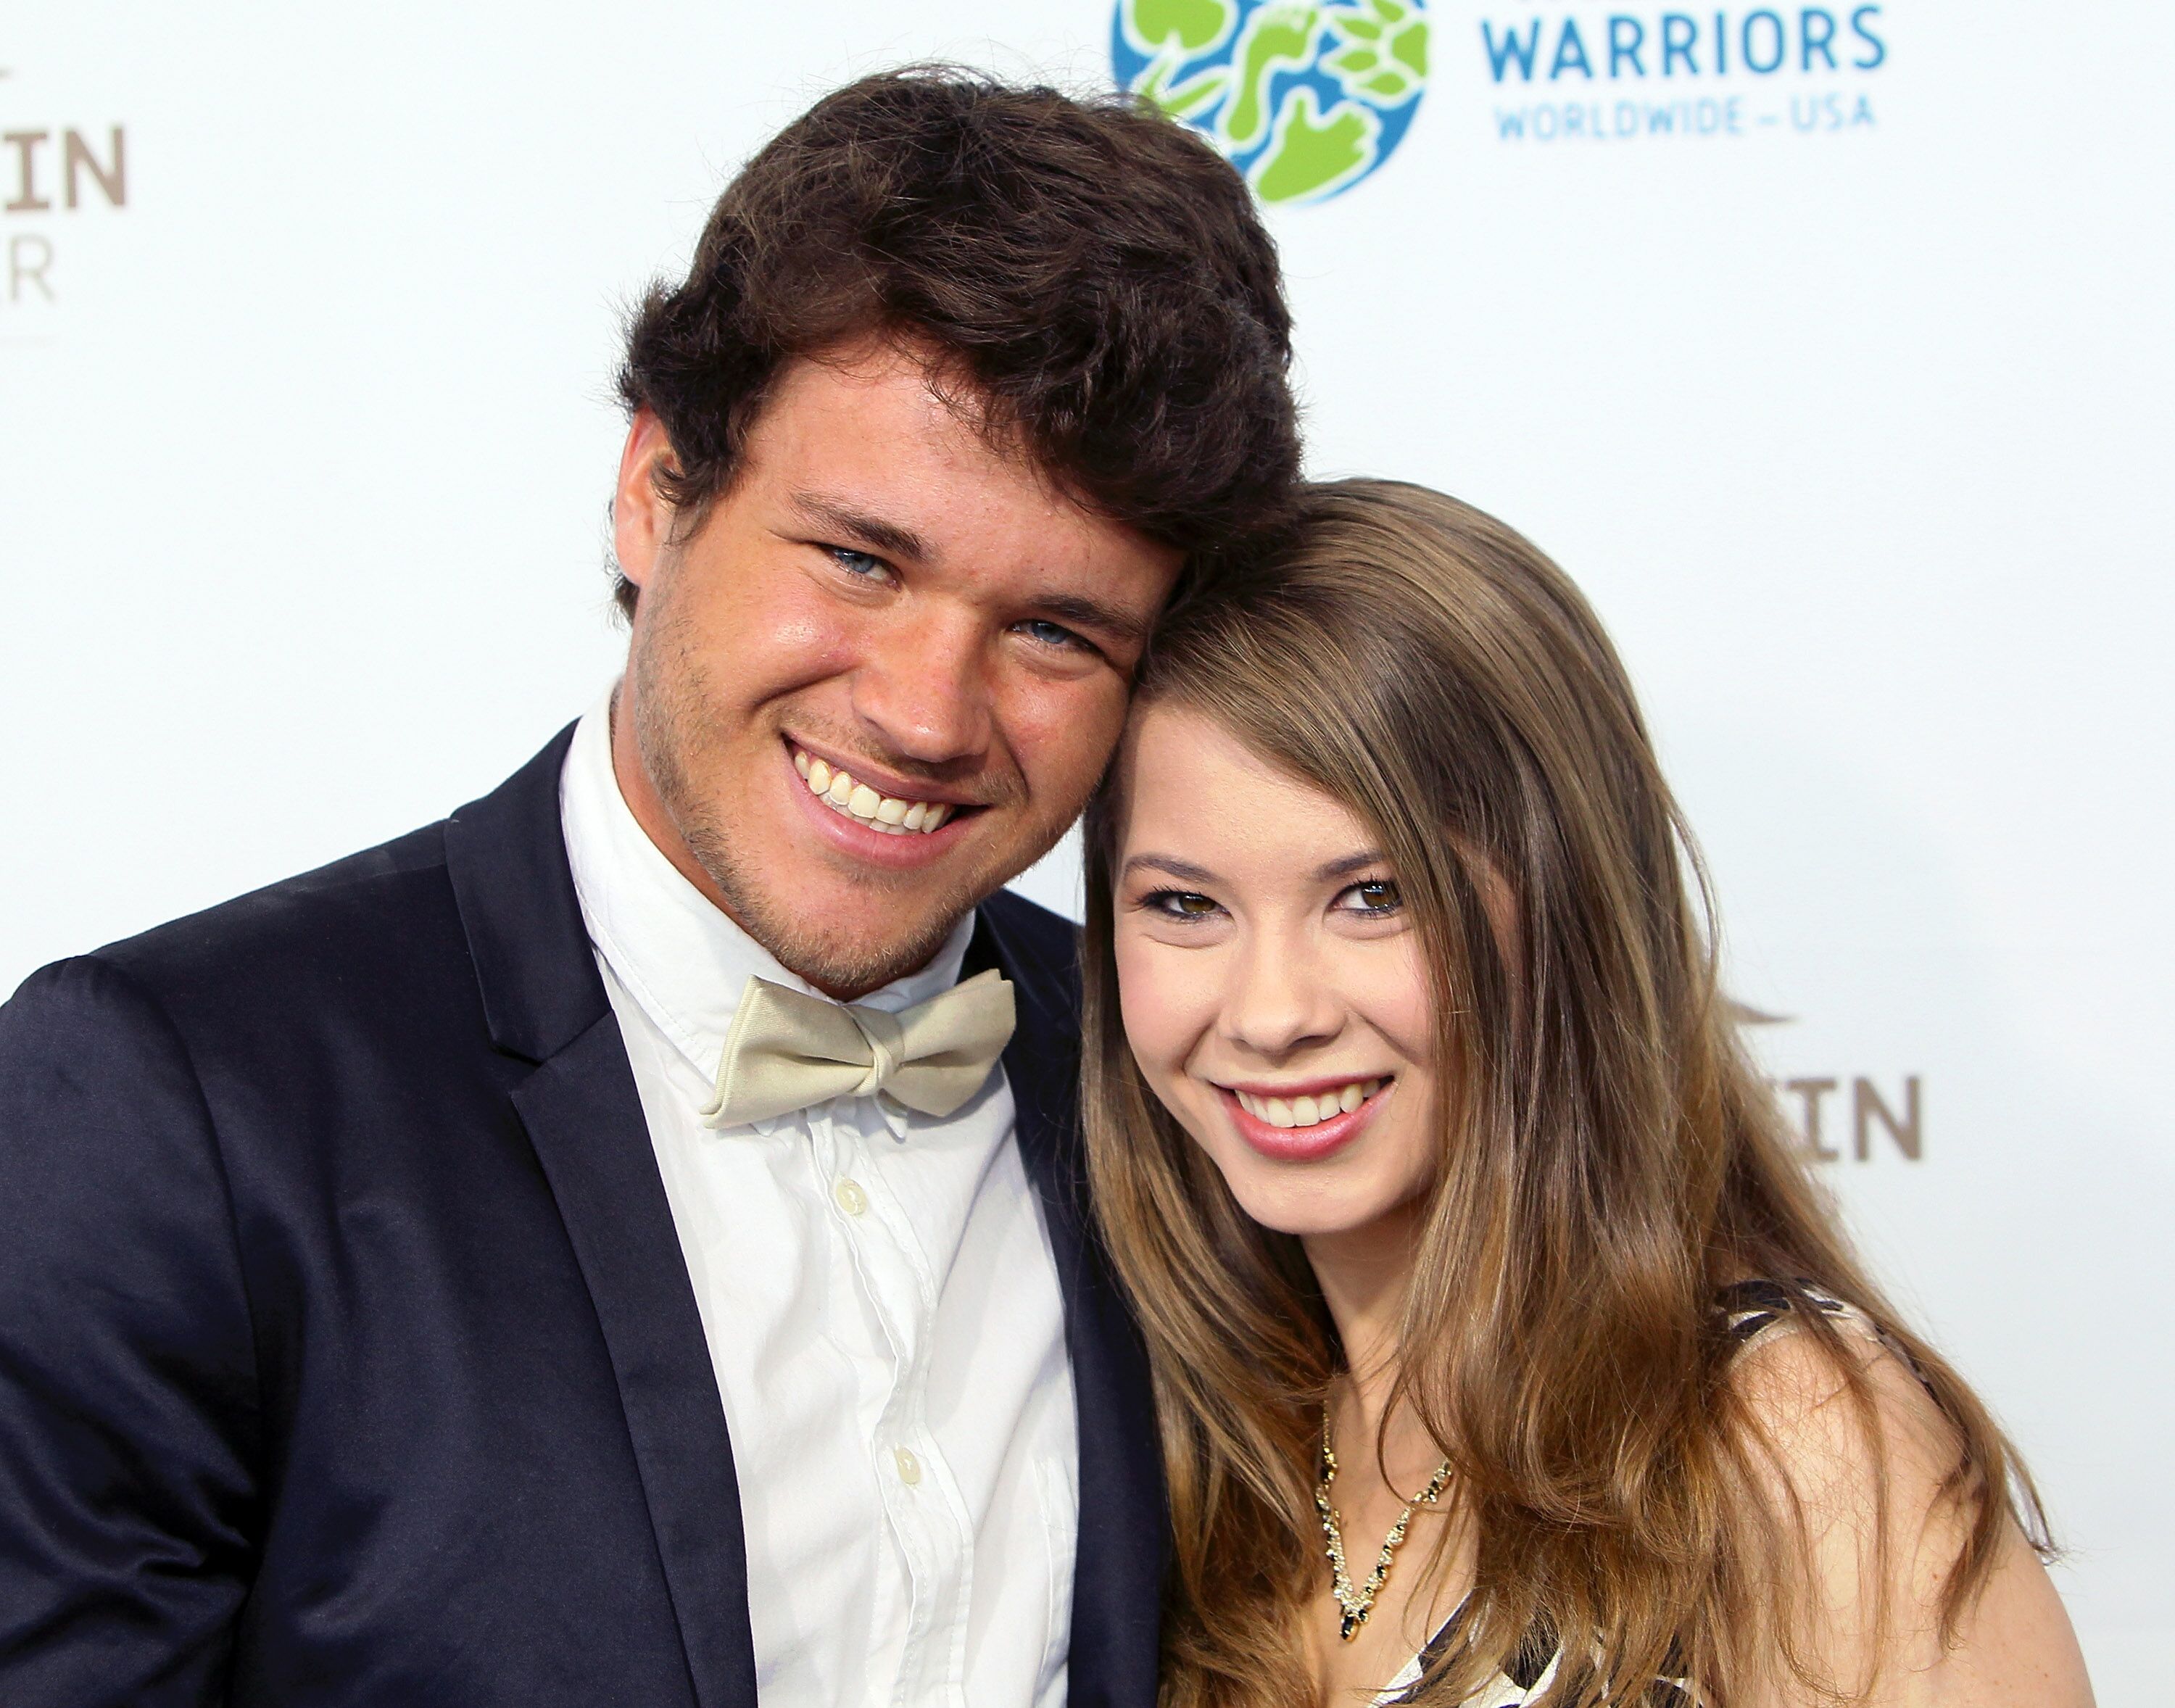 Wakeboarder Chandler Powell (L) and TV personality Bindi Irwin attend the Steve Irwin Gala Dinner at JW Marriott Los Angeles at L.A. LIVE on May 21, 2016 | Photo: Getty Images